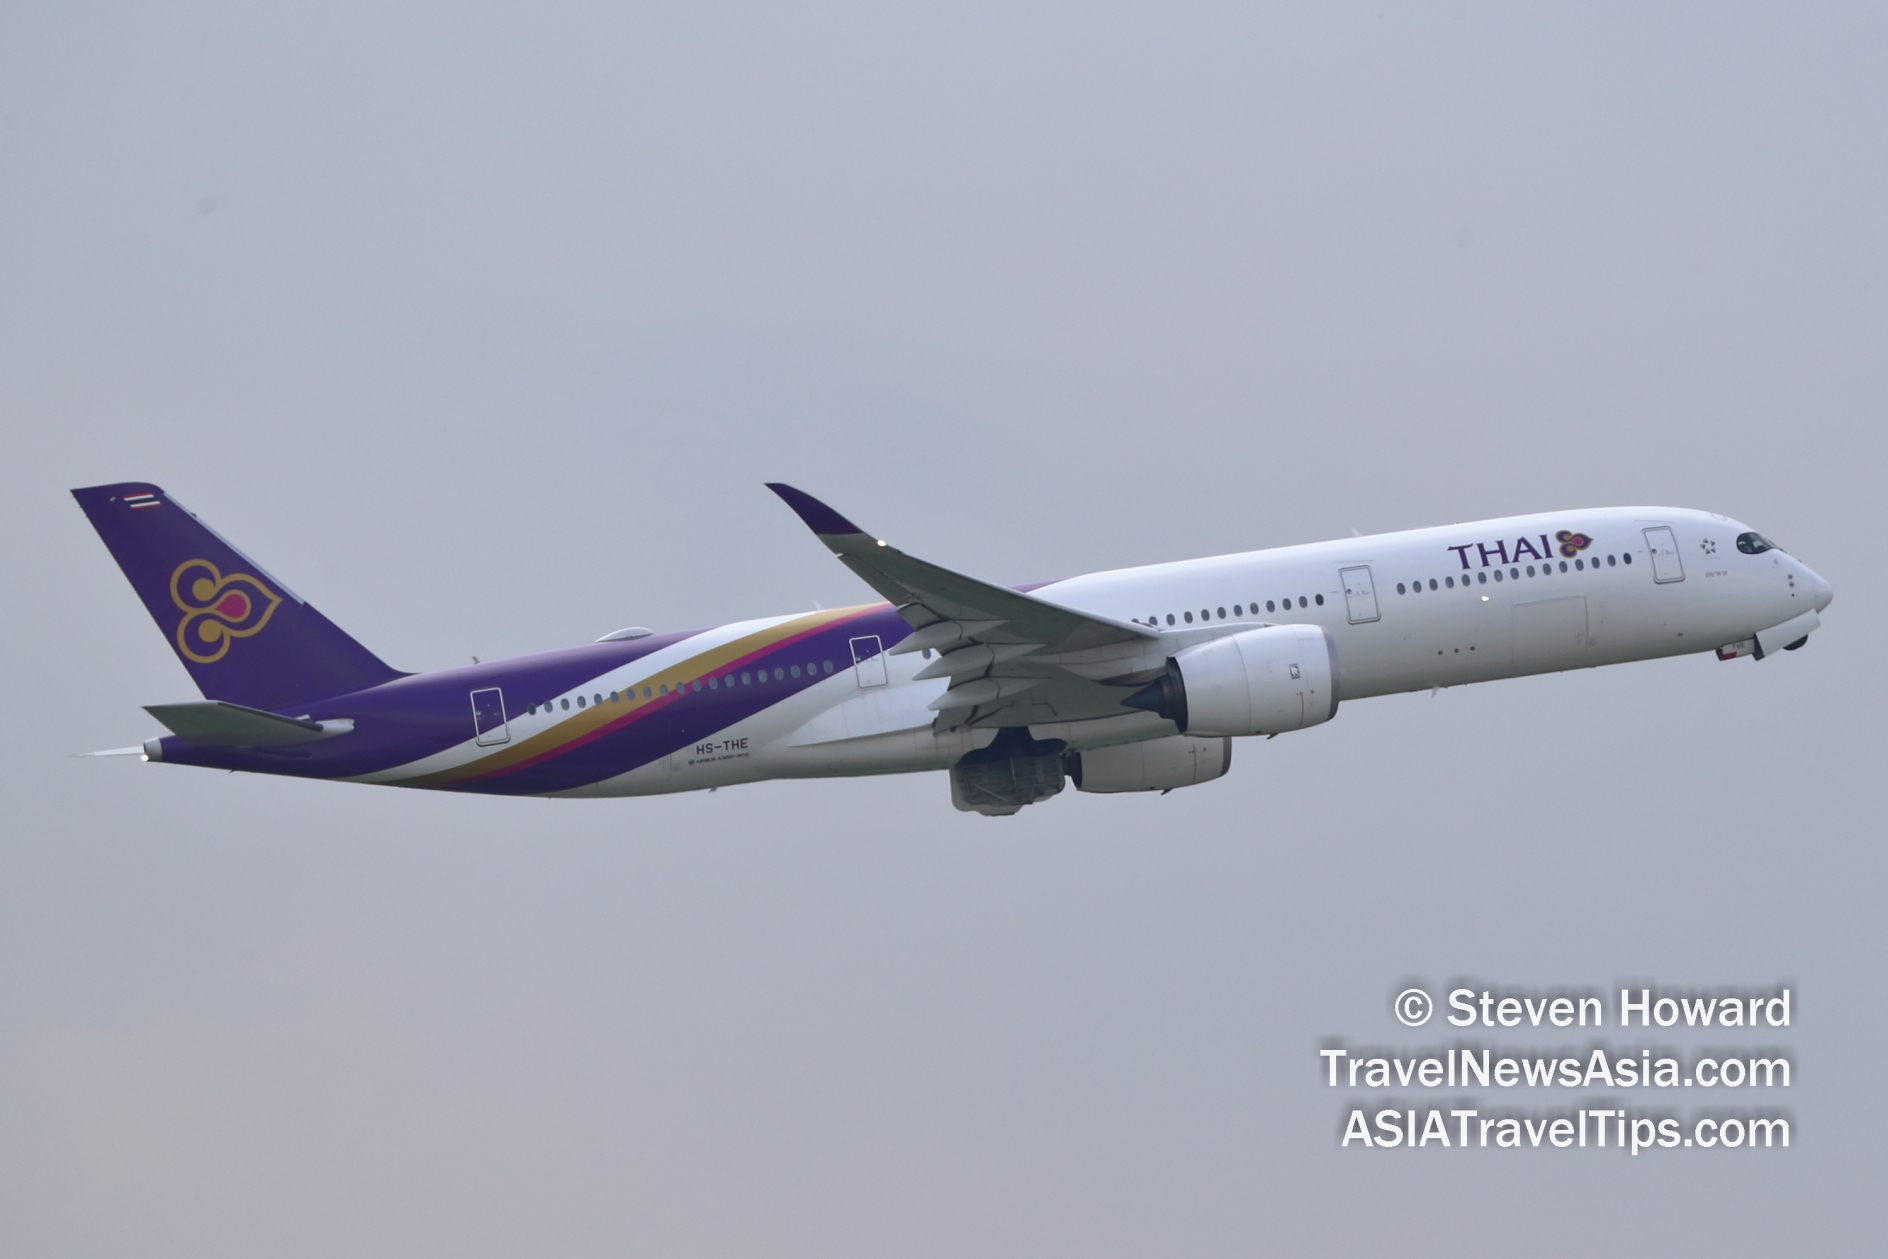 Thai Airways A350-900 reg: HS-THE. Picture by Steven Howard of TravelNewsAsia.com Click to enlarge.